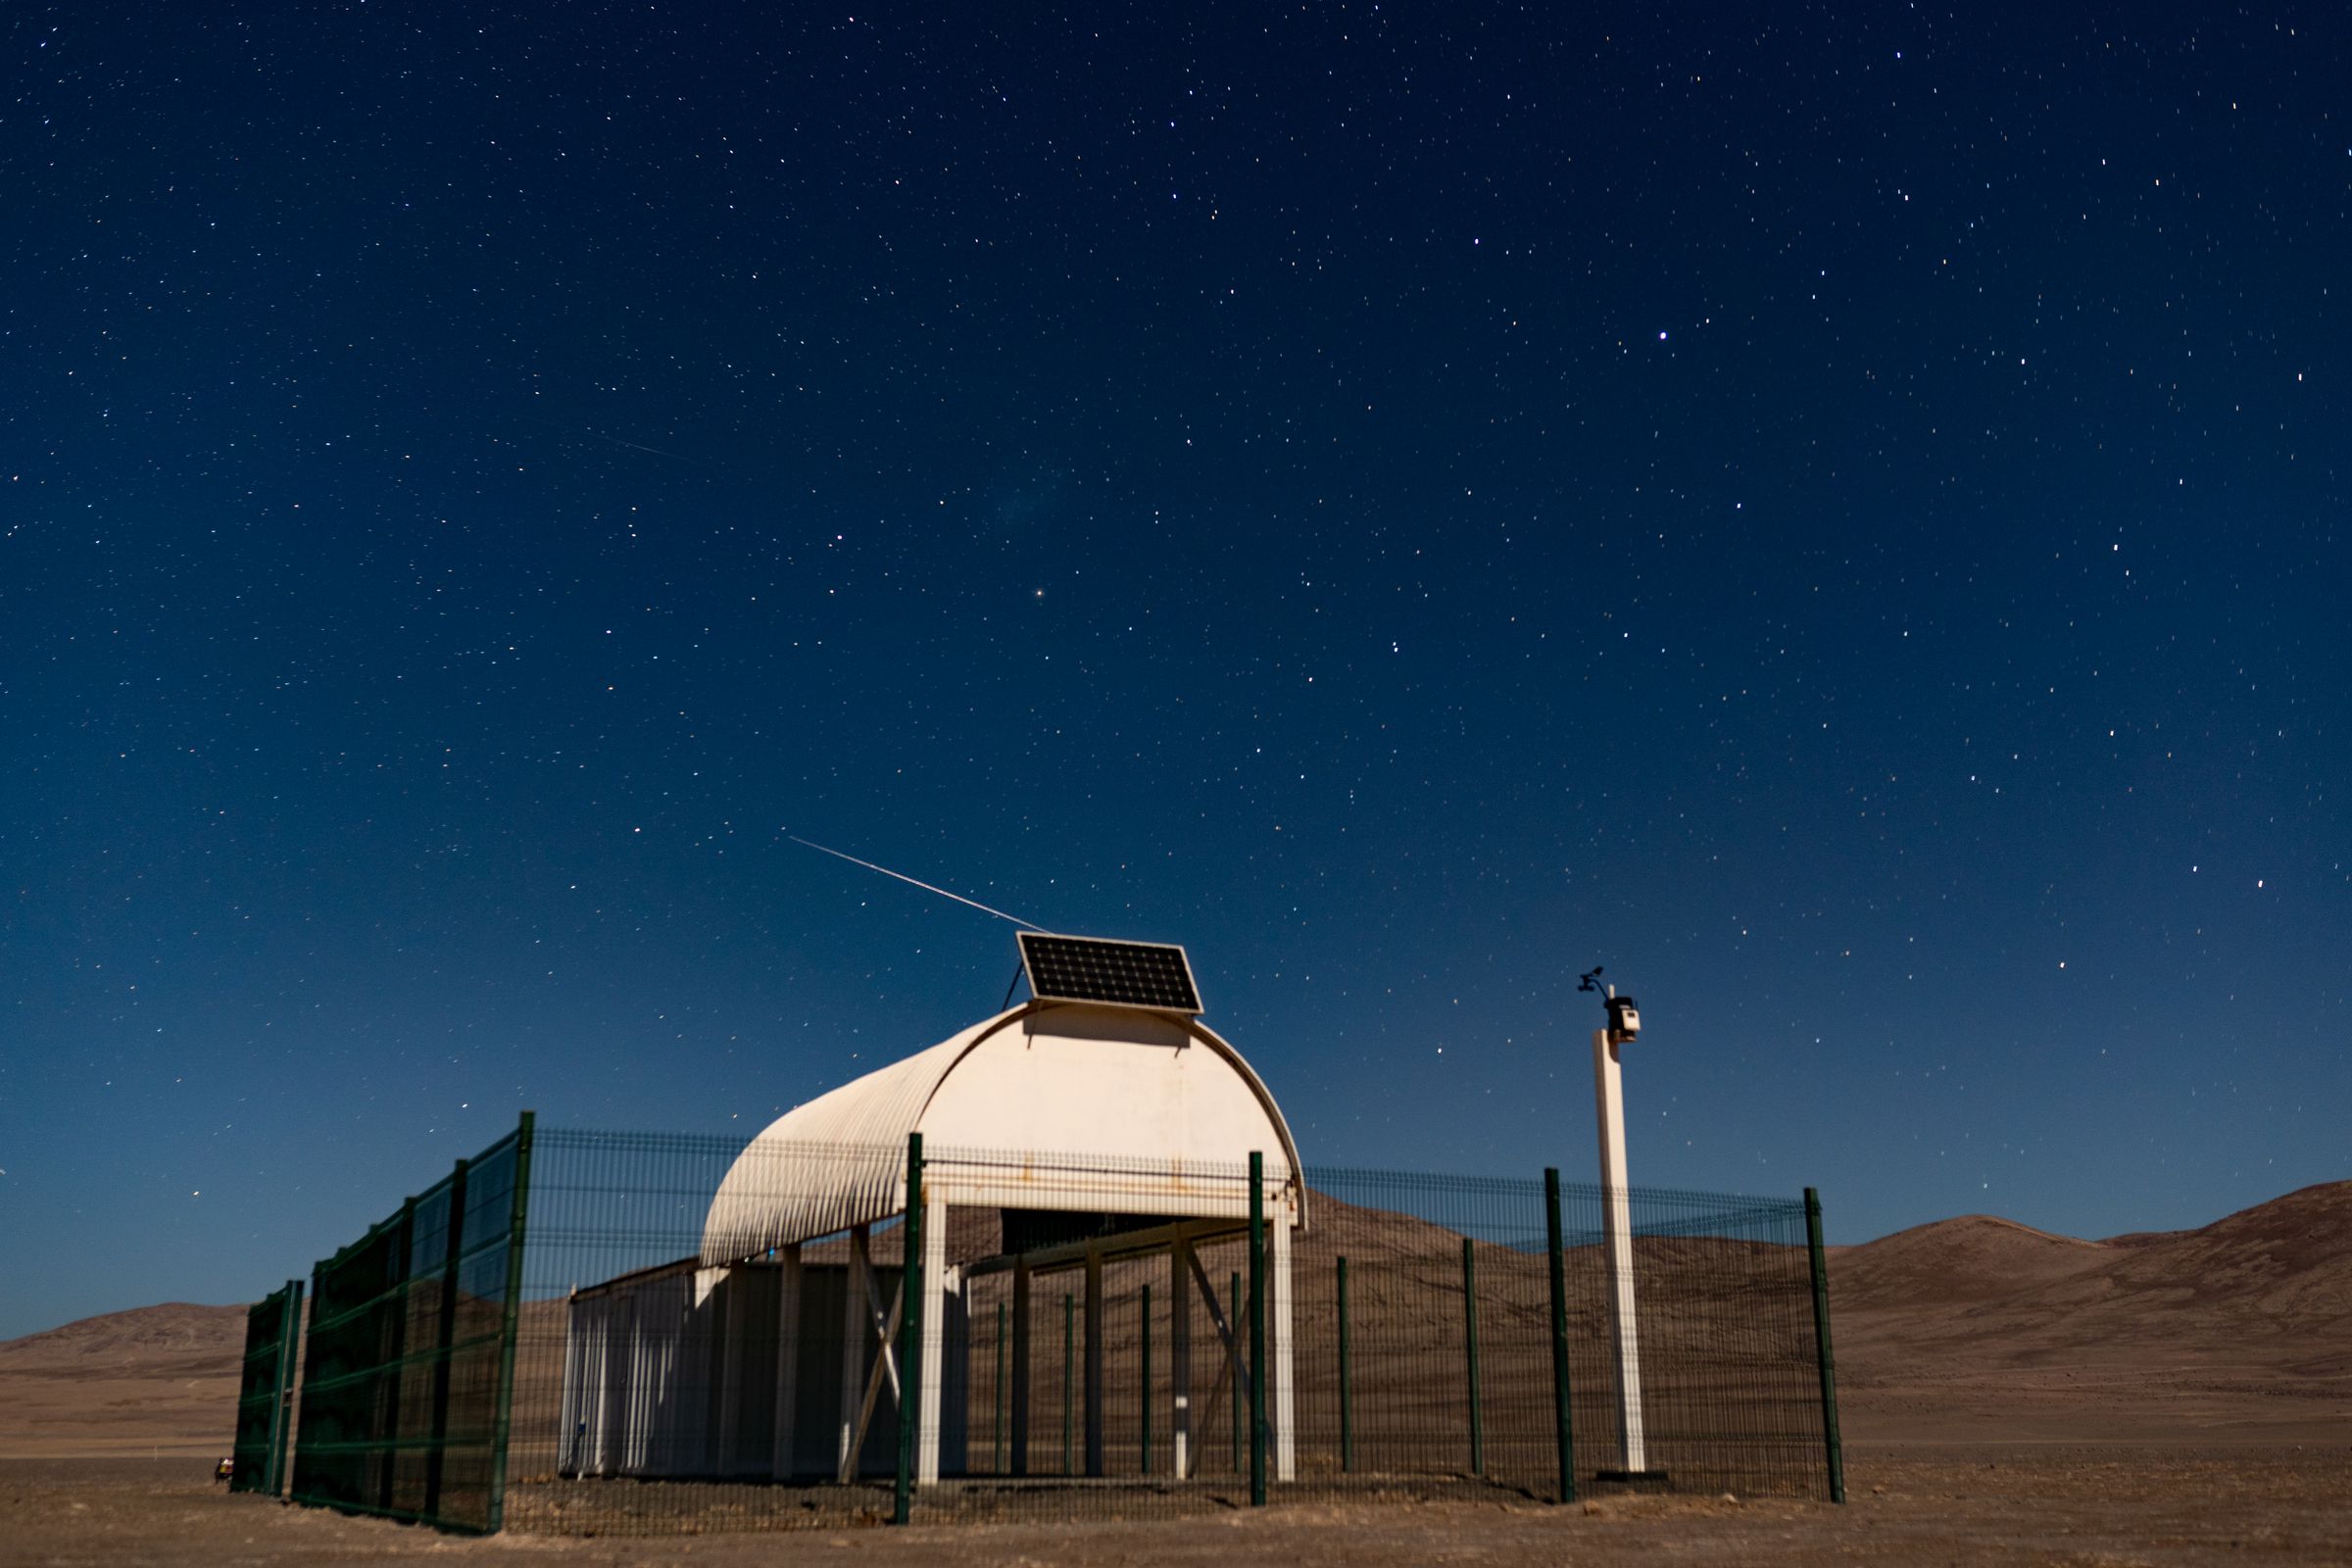 The Ckoirama Observatory in Chile, while a trail of Starlink satellites pass overhead.